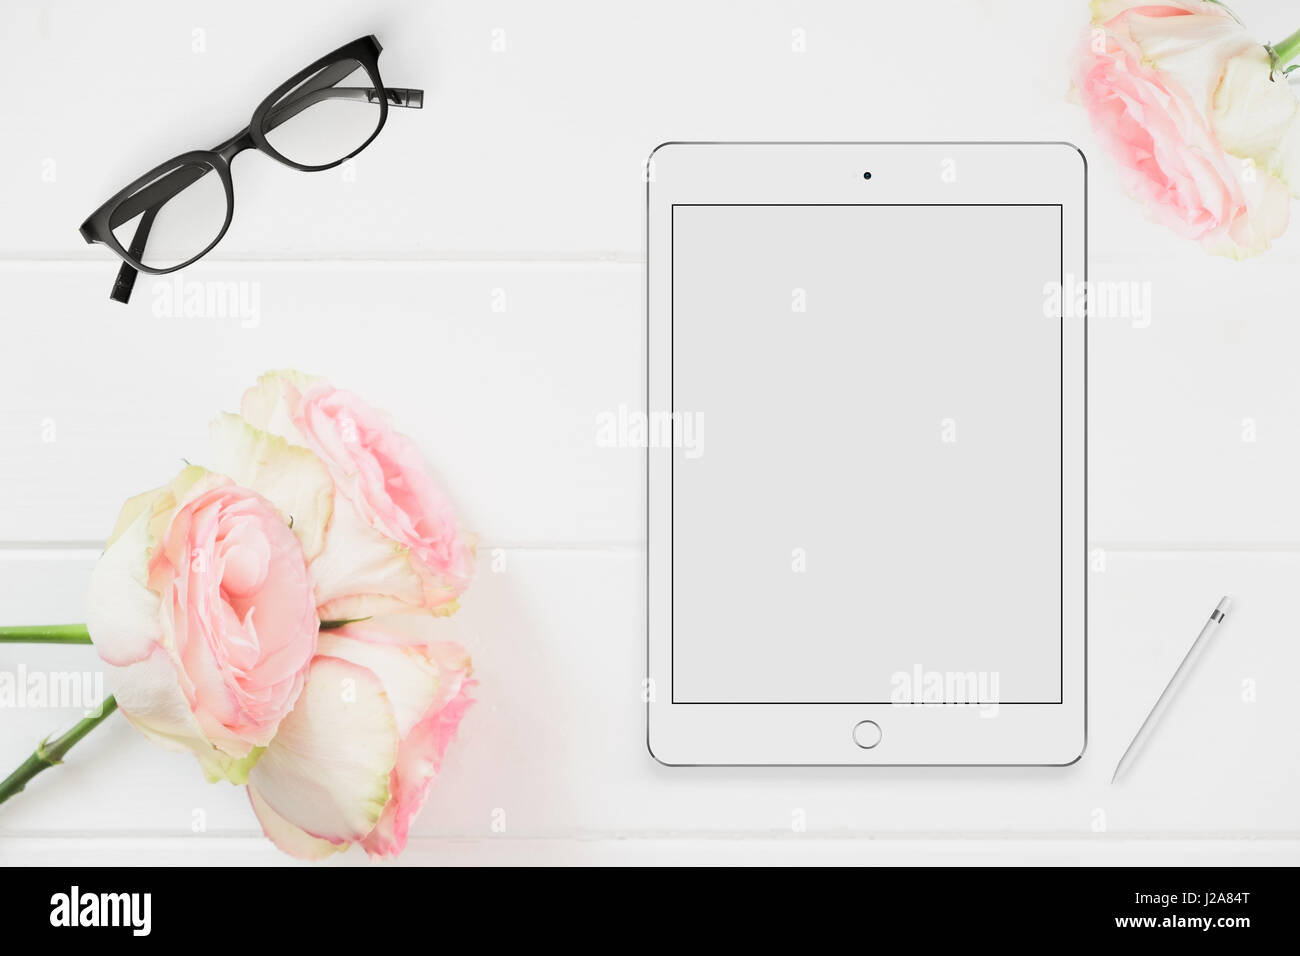 Portrait Tablet Mockup Floral styled Mockup, overlay your design, quote, business message onto the tablet screen Stock Photo